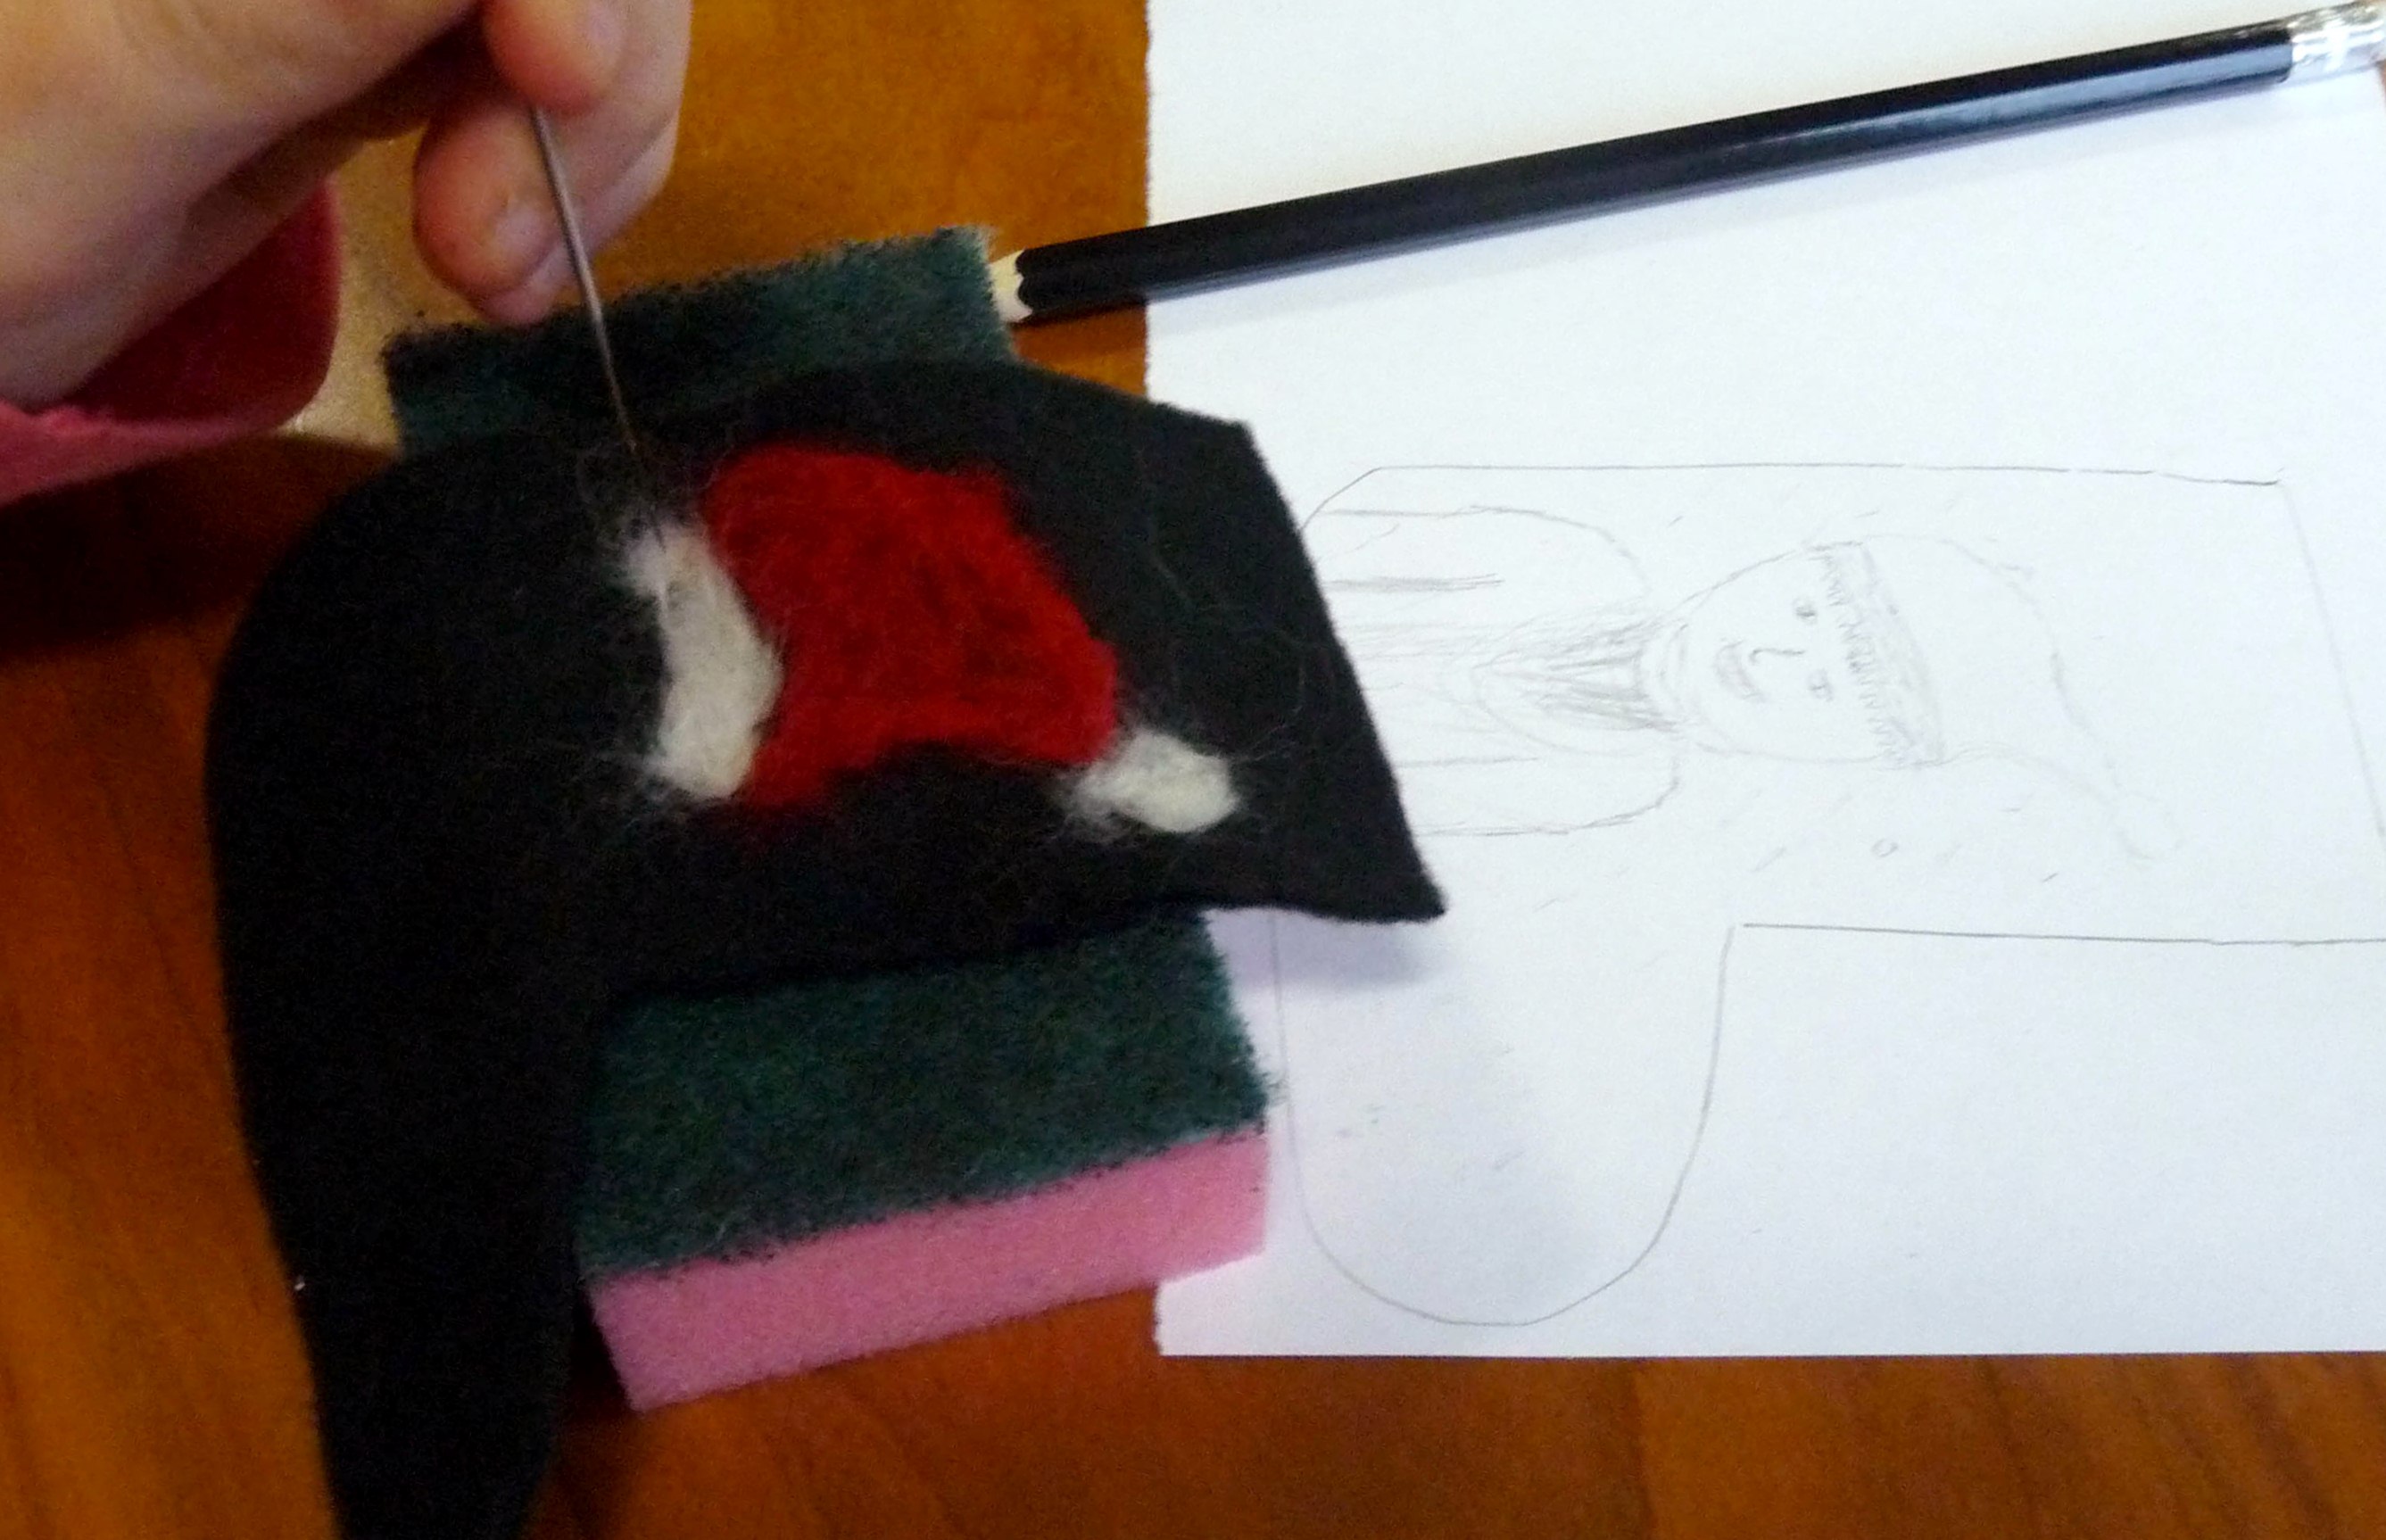 today our YE Group made needle-felted Christmas stockings